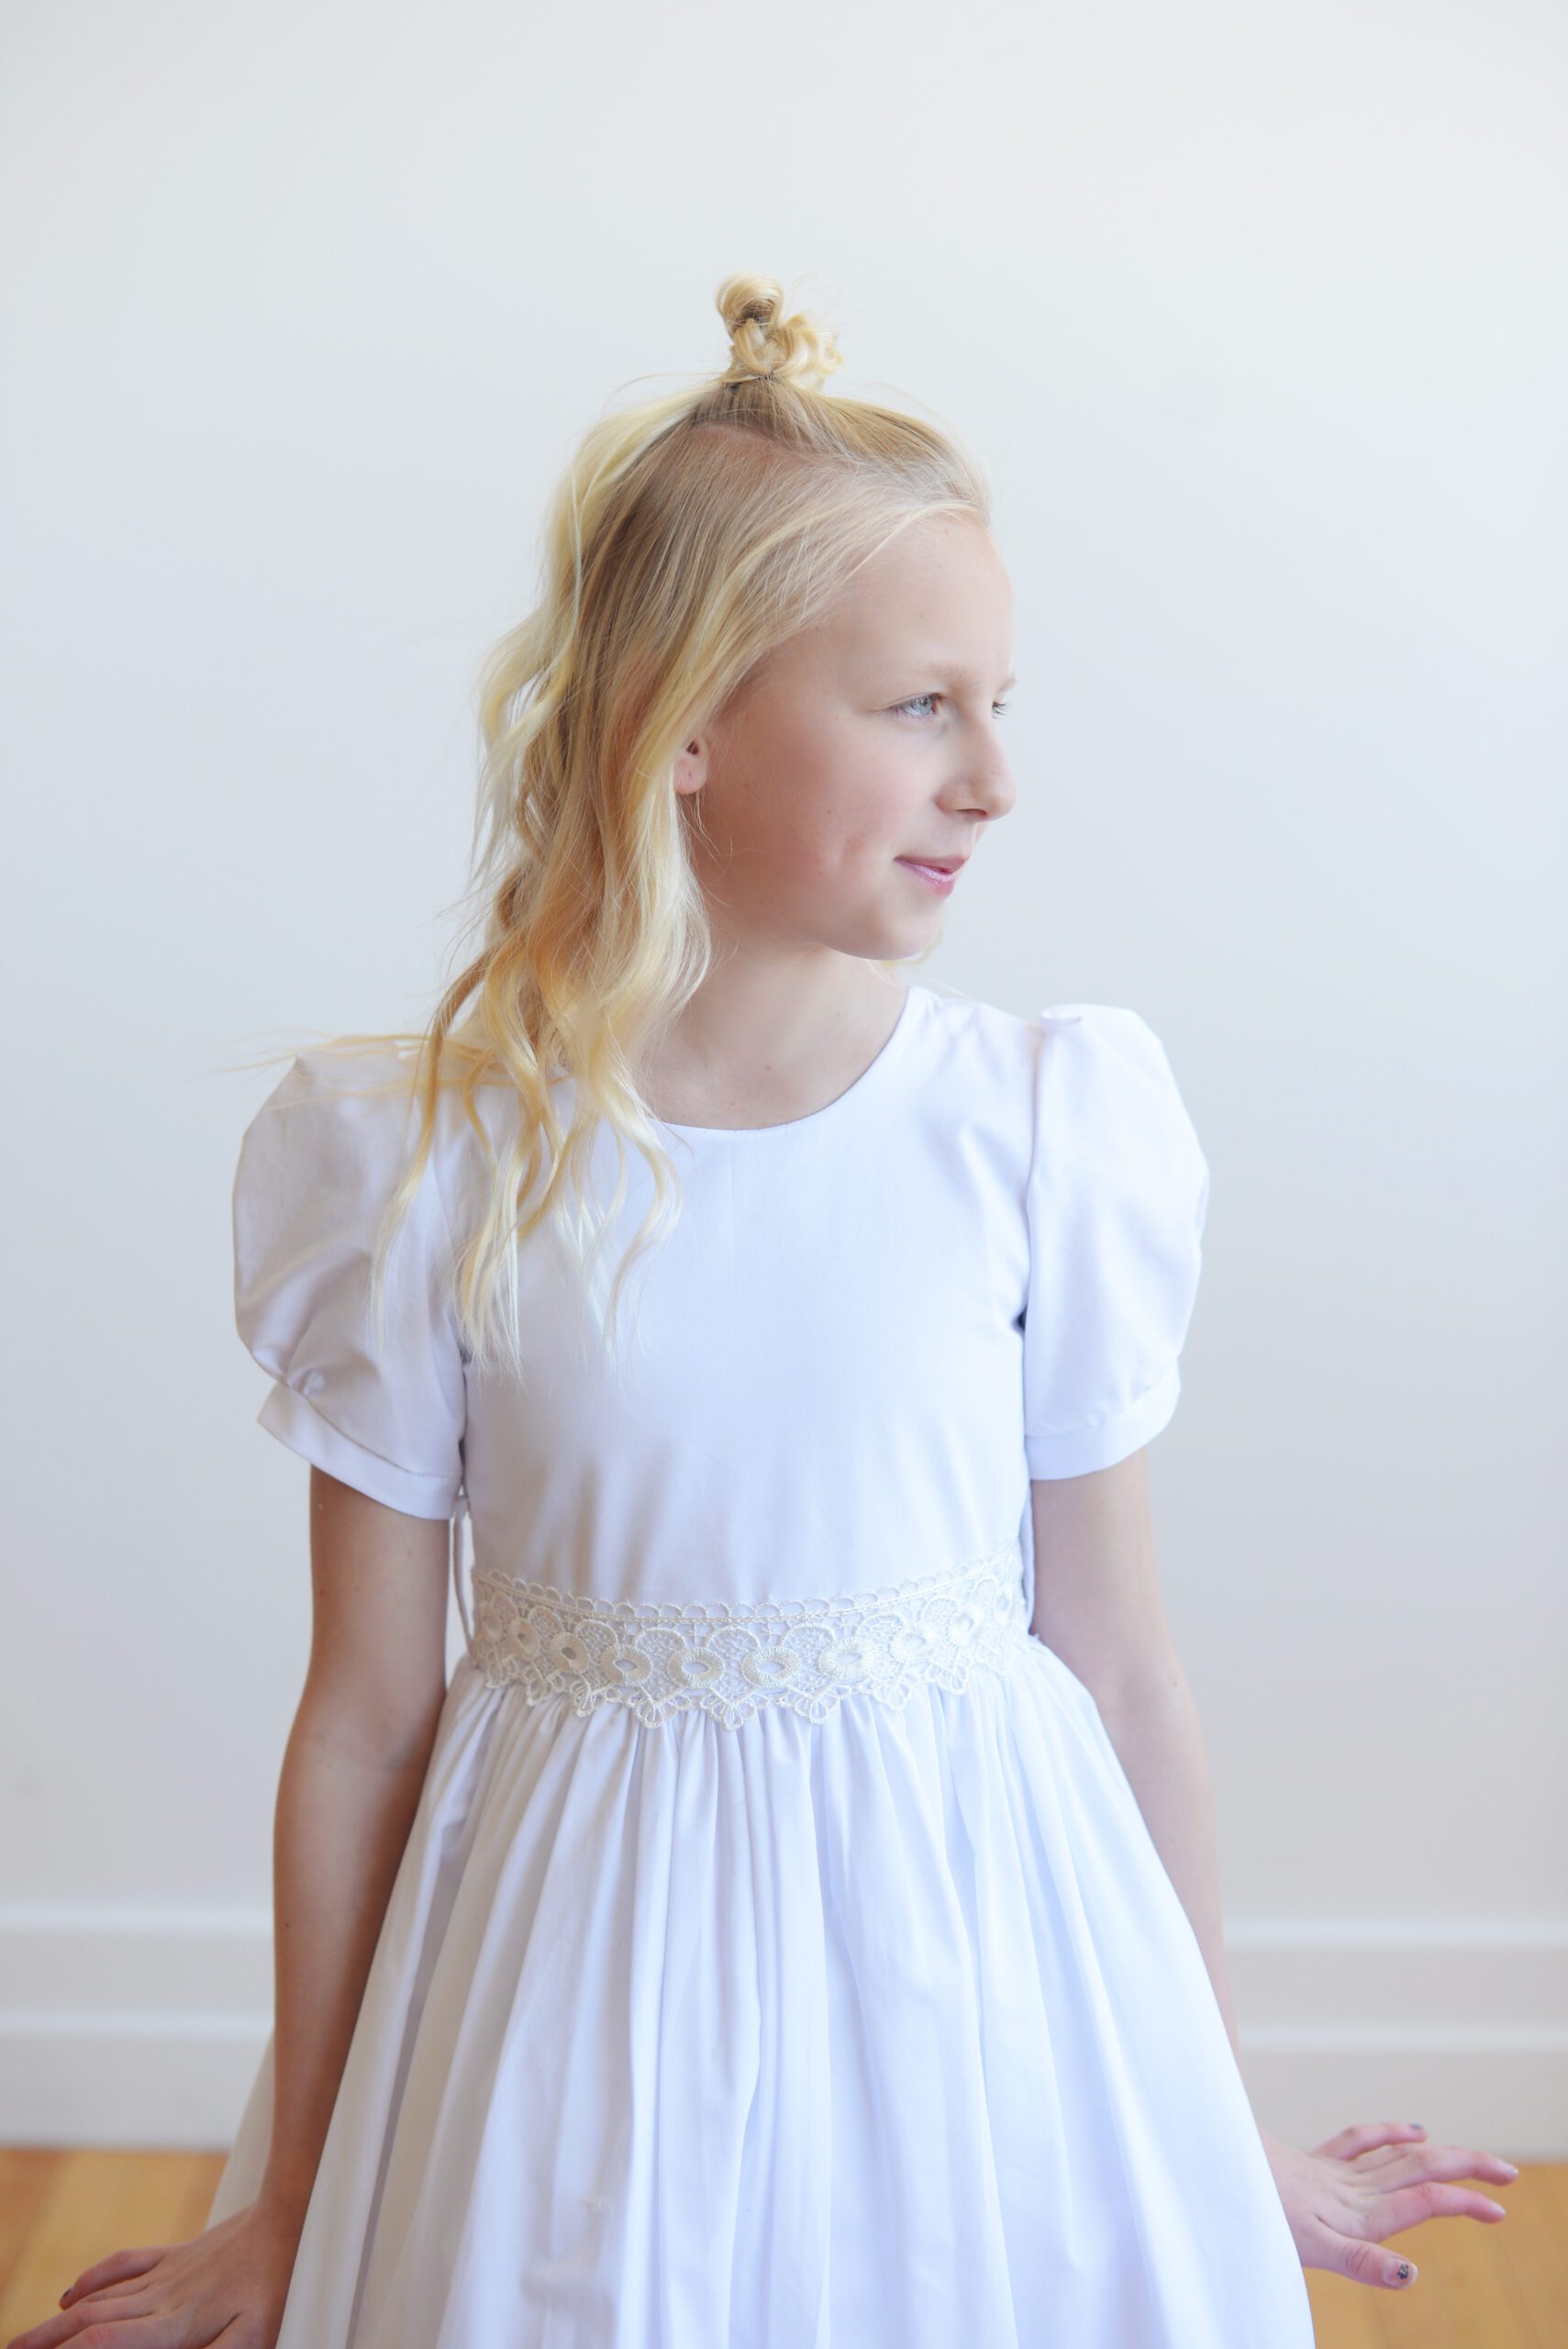 A photo of a white cotton first communion dress with a lace sash